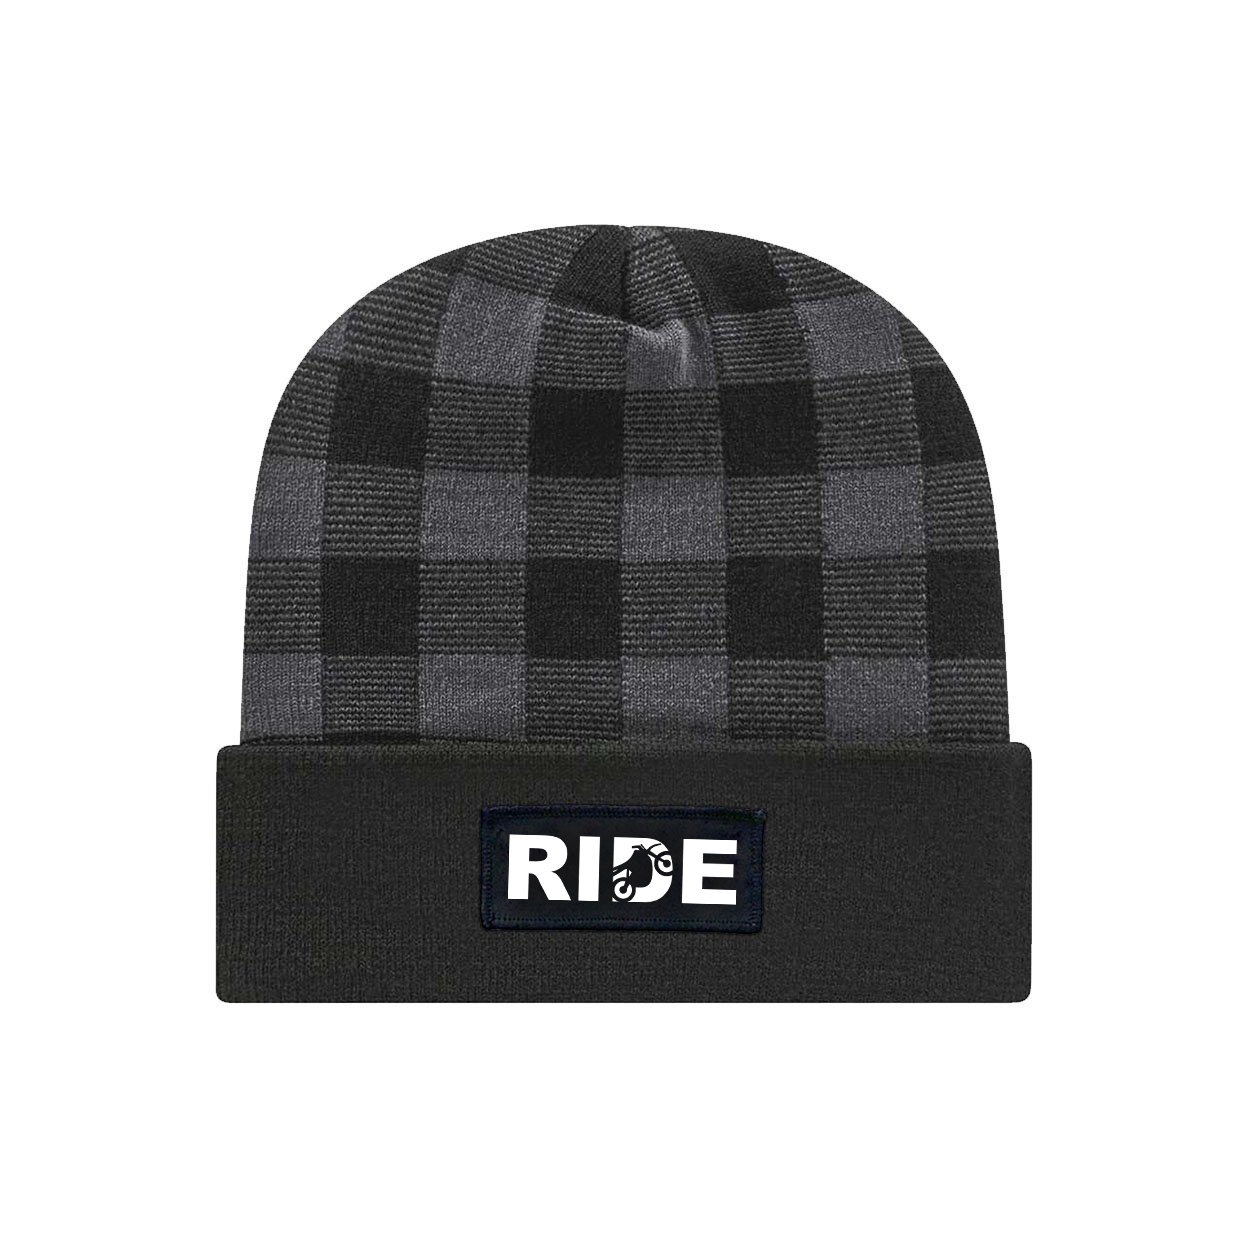 Ride Moto Logo Night Out Woven Patch Roll Up Plaid Beanie Black/Heather Gray (White Logo)